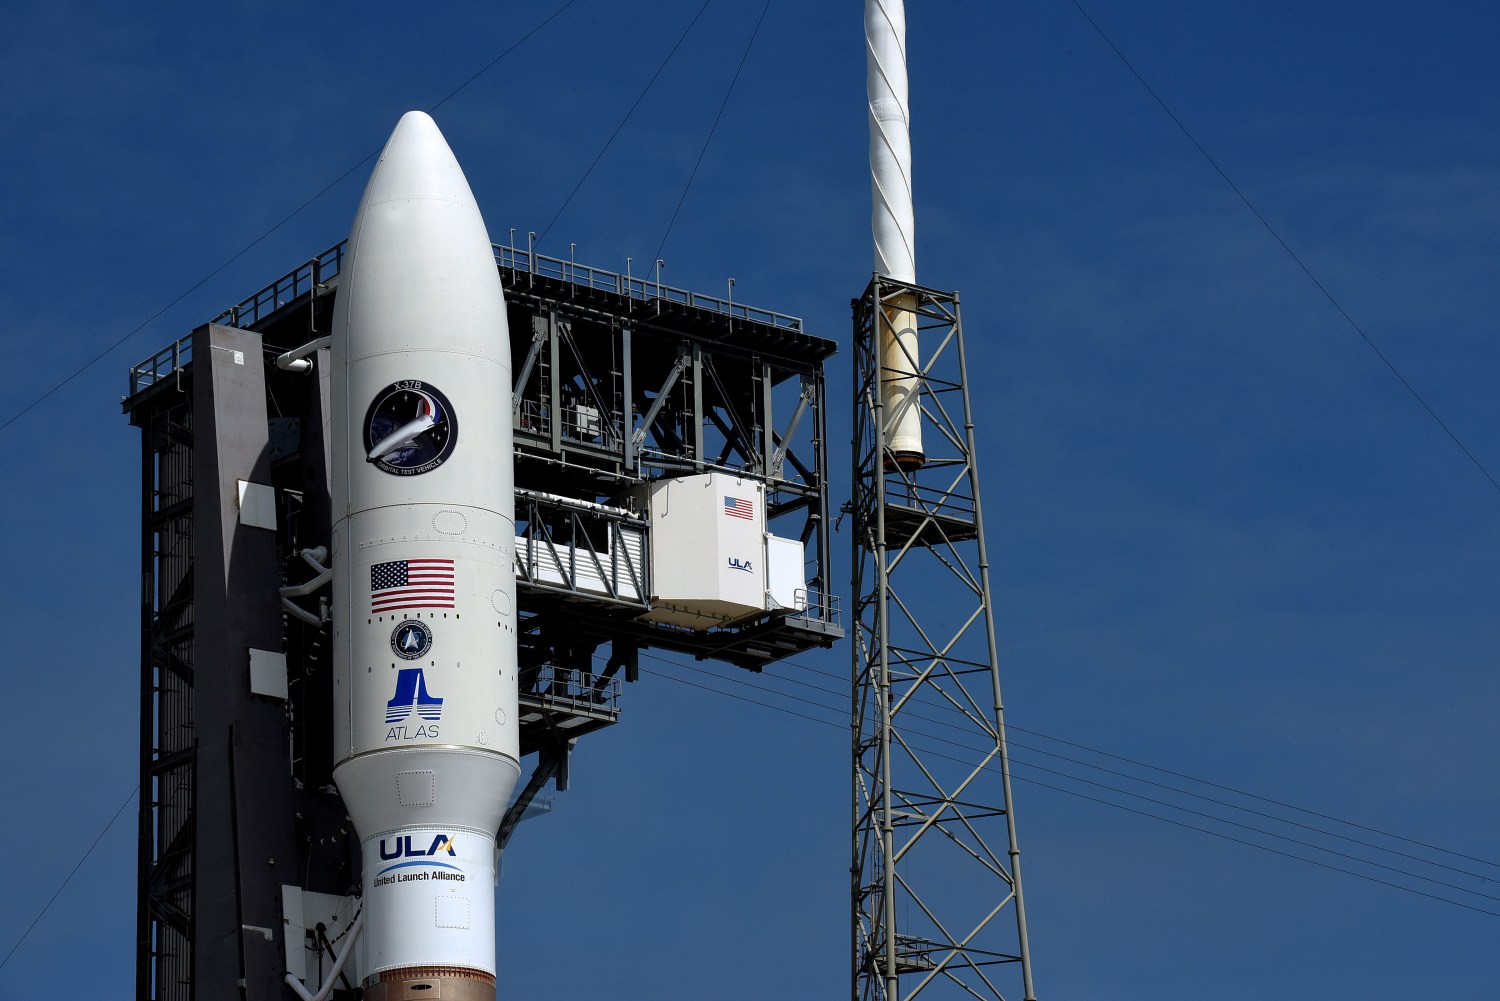 A United Launch Alliance Atlas V rocket carrying the X-37B Orbital Test Vehicle (OTV-6) stands ready on May 15, 2020 for a scheduled launch tomorrow at Cape Canaveral Air Force Station in Cape Canaveral, Florida. The USSF-7 mission for the U.S. Space Force will be the sixth flight of the OTV-6 space plane, an unmanned spacecraft which resembles a miniature version of NASA's retired space shuttle. (Photo by Paul Hennessy/NurPhoto)NO USE FRANCE